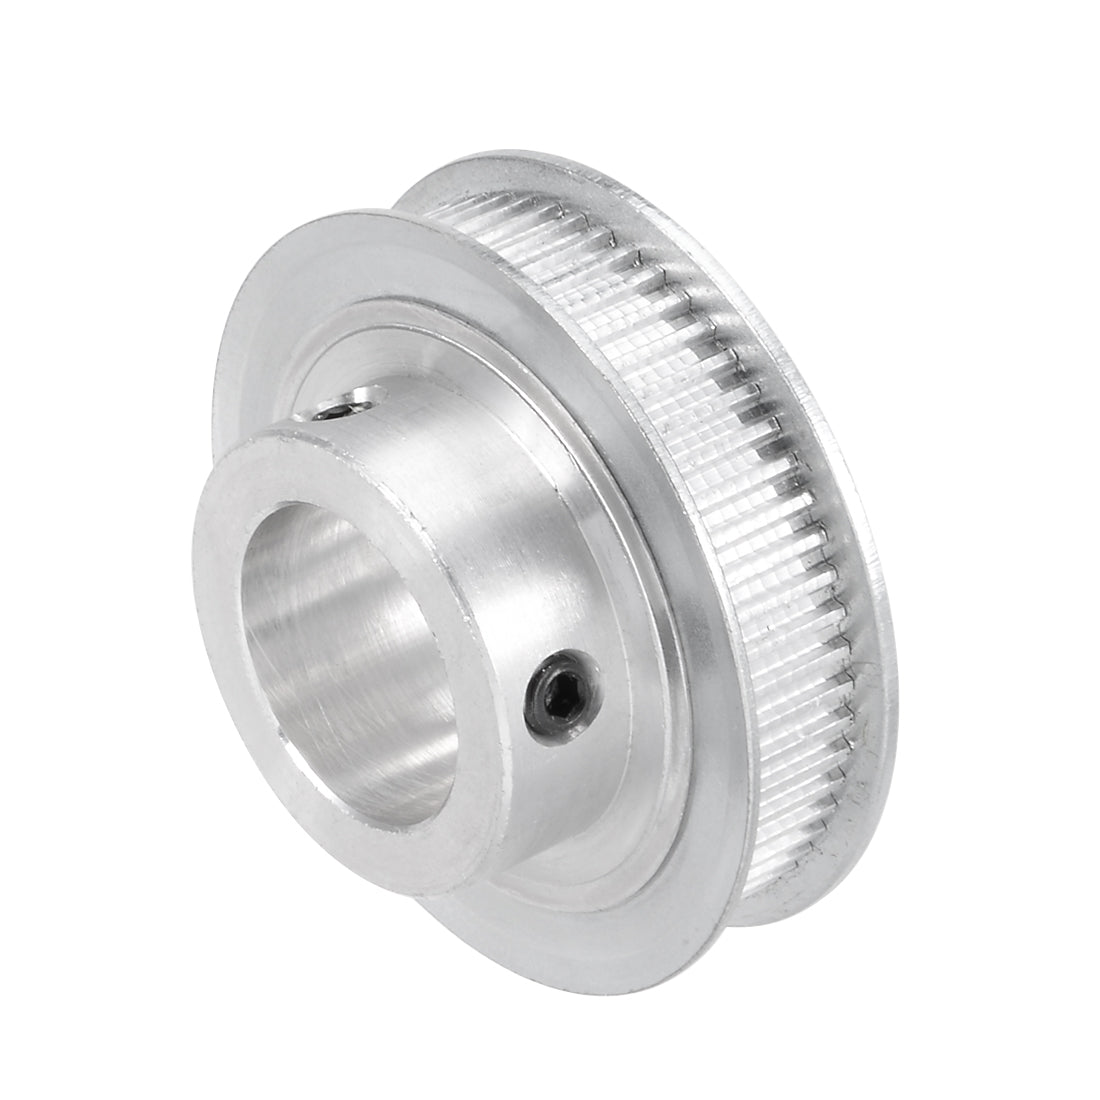 uxcell Uxcell Aluminum Timing Pulley M-X-L 60 Teeth 15mm Bore Timing Belt Pulley Synchronous Wheel for 6mm Belt